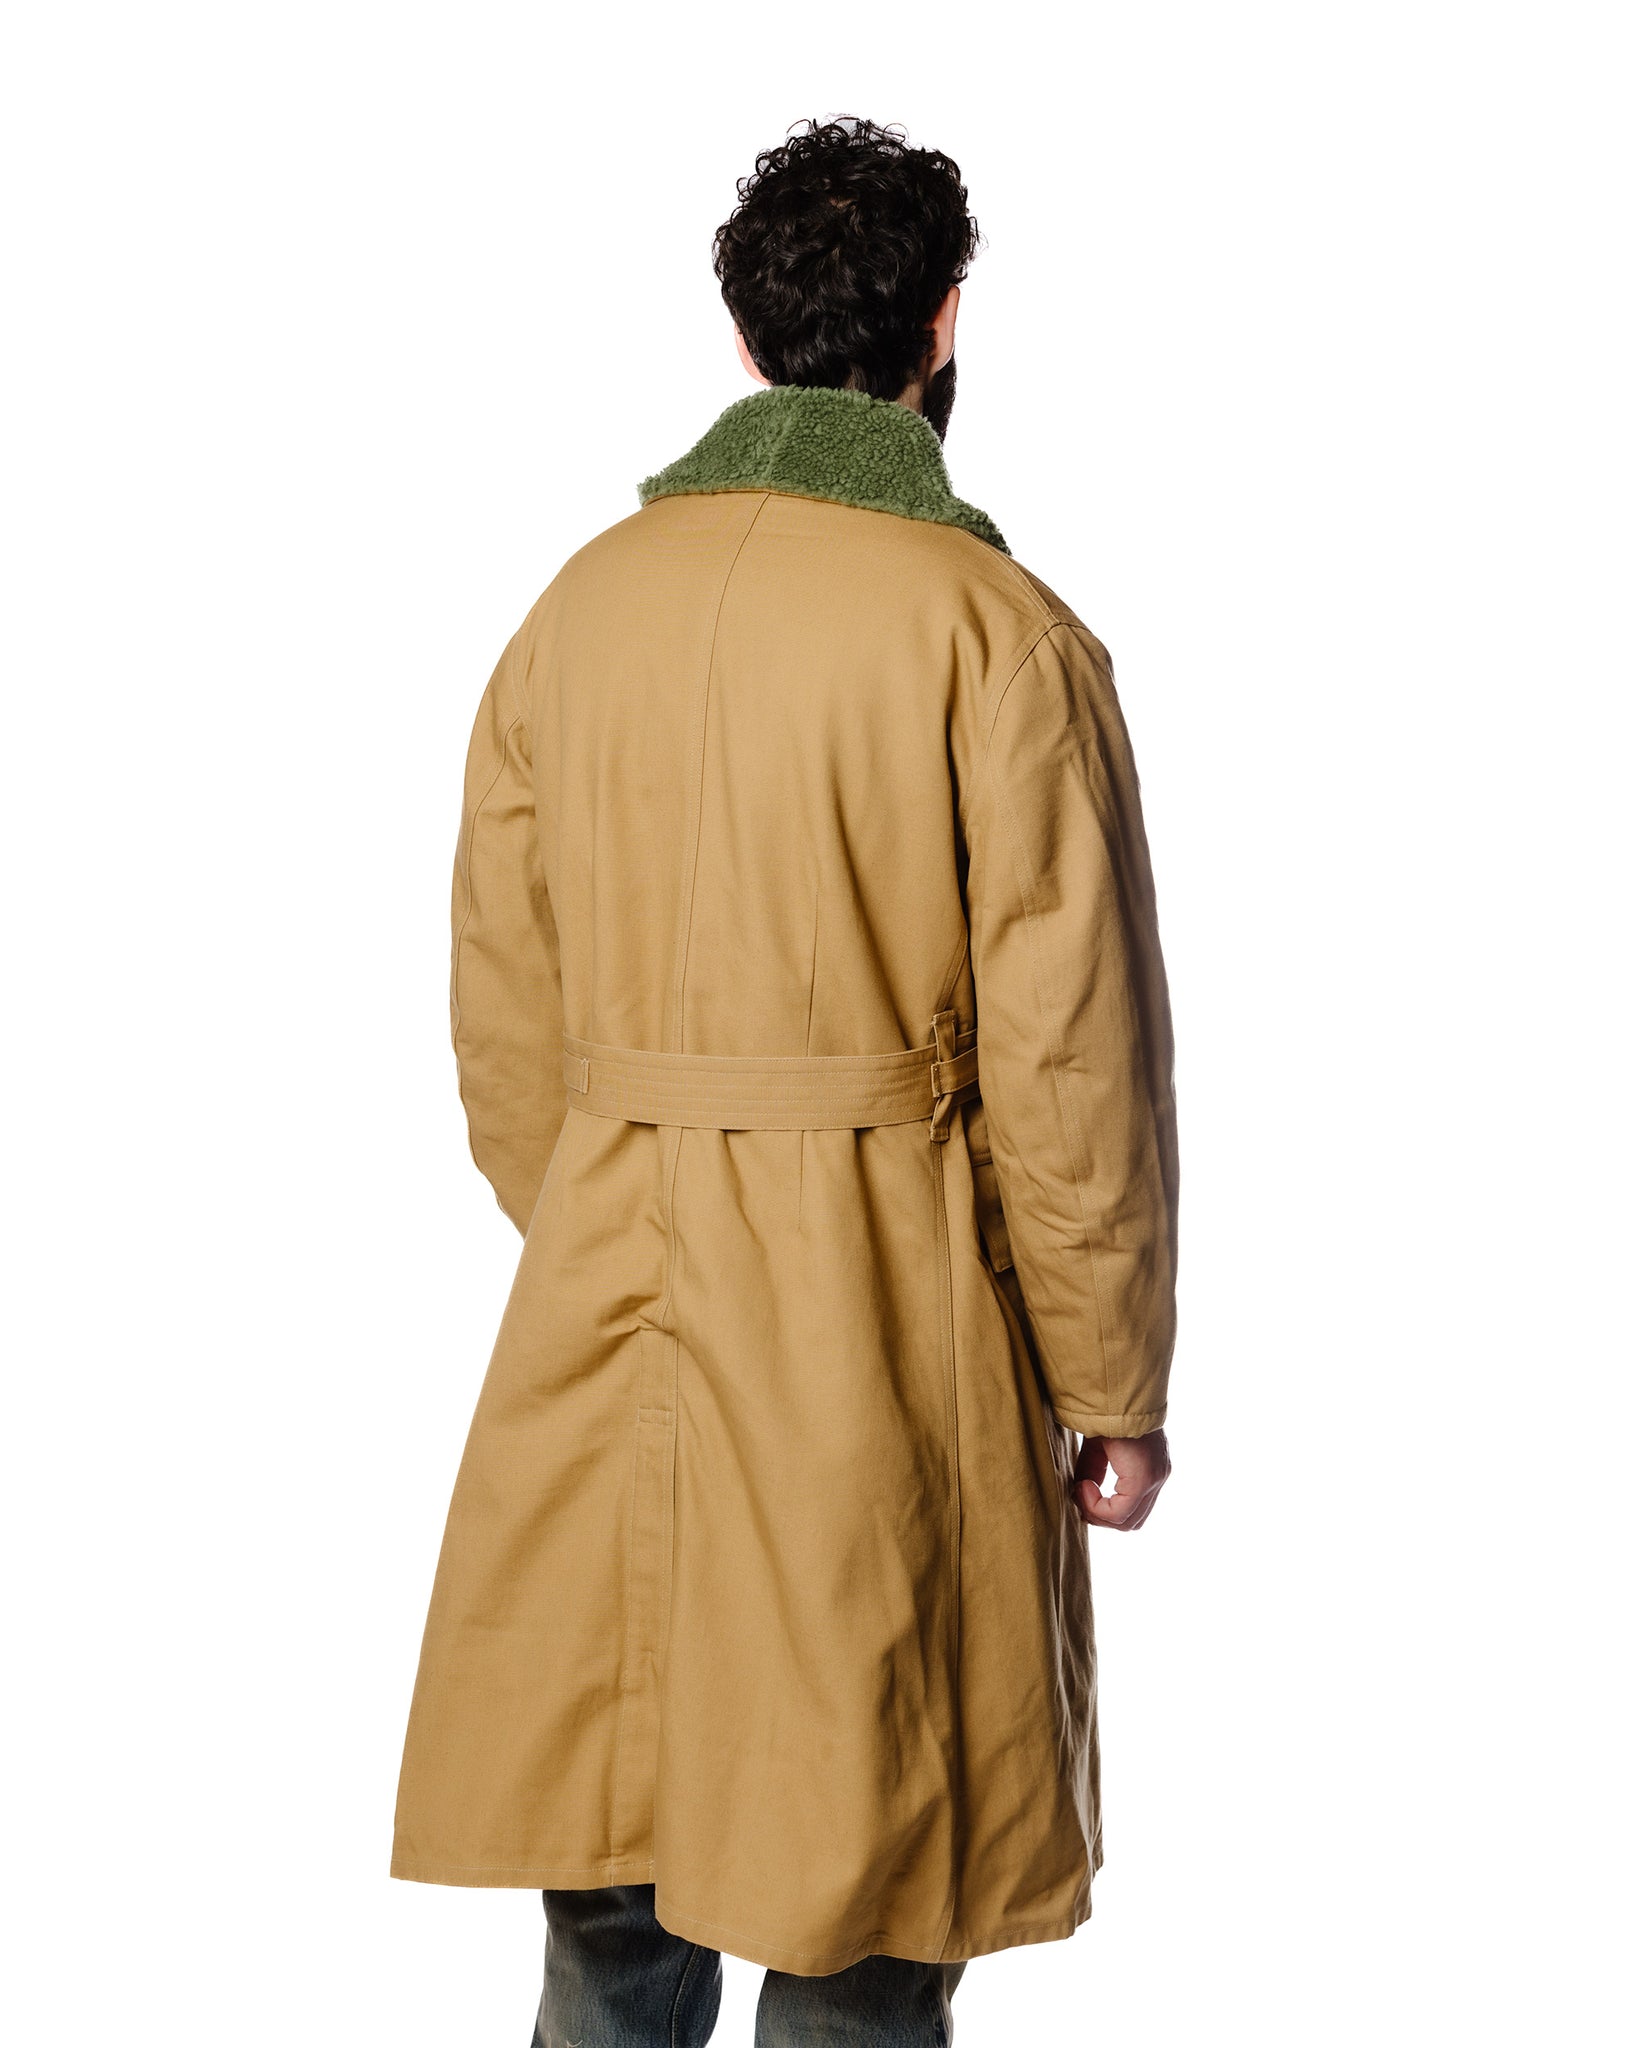 The Real McCoy's for Lost & Found OJ21101 Jeep Coat Model Rear